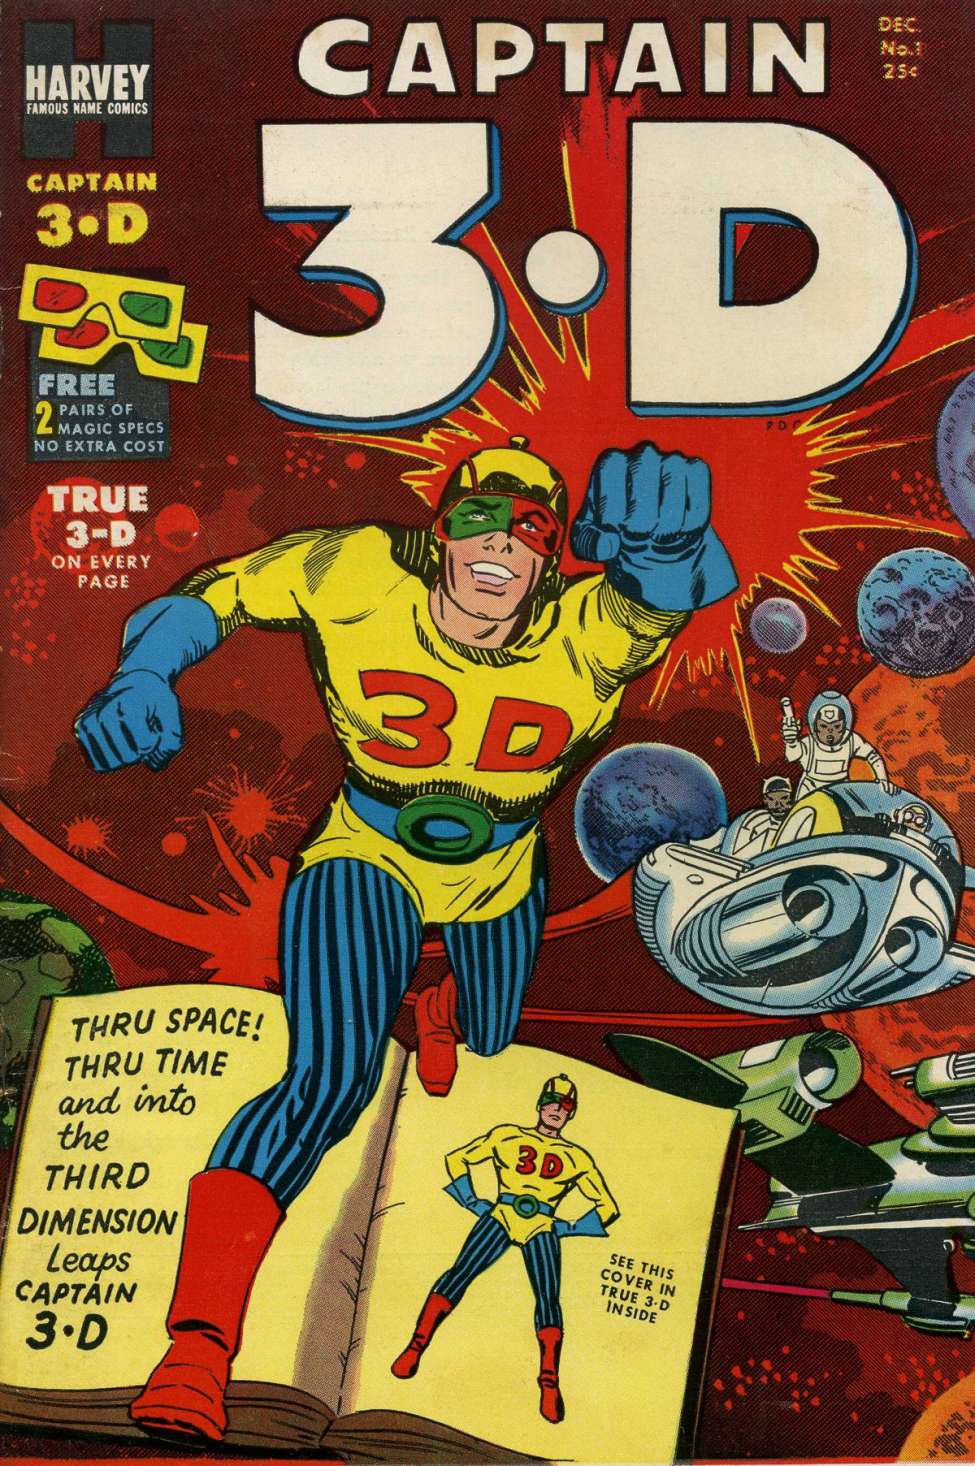 Book Cover For Captain 3-D 1 - Version 1